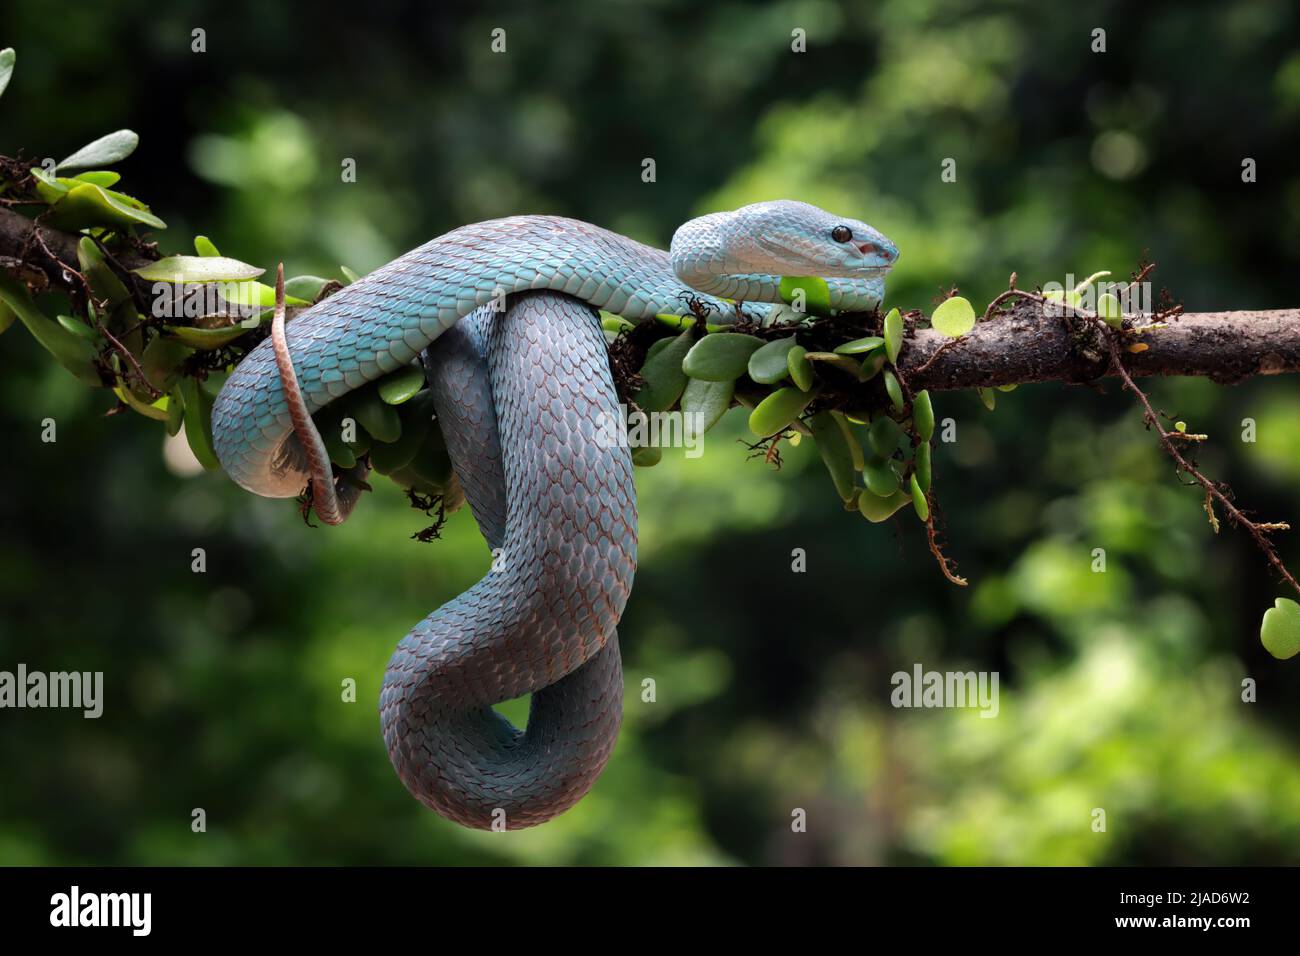 Blue white-lipped island pit viper snake on a branch, Indonesia Stock Photo